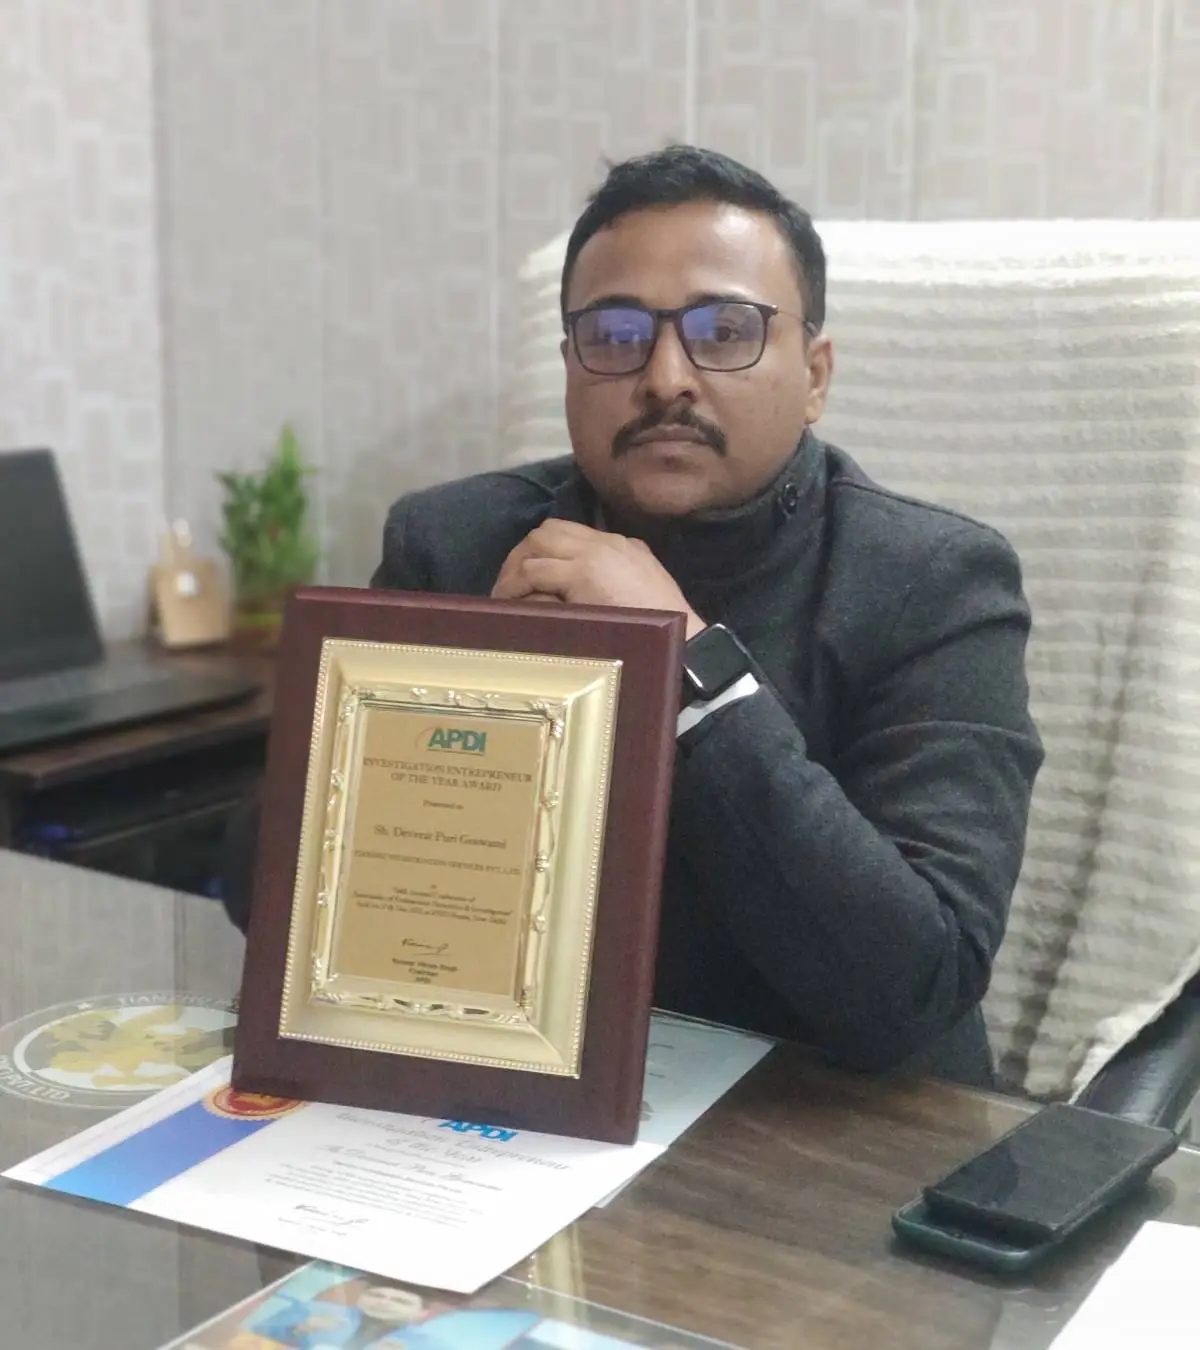 Chandigarh Private Detective agency owner with award at office.